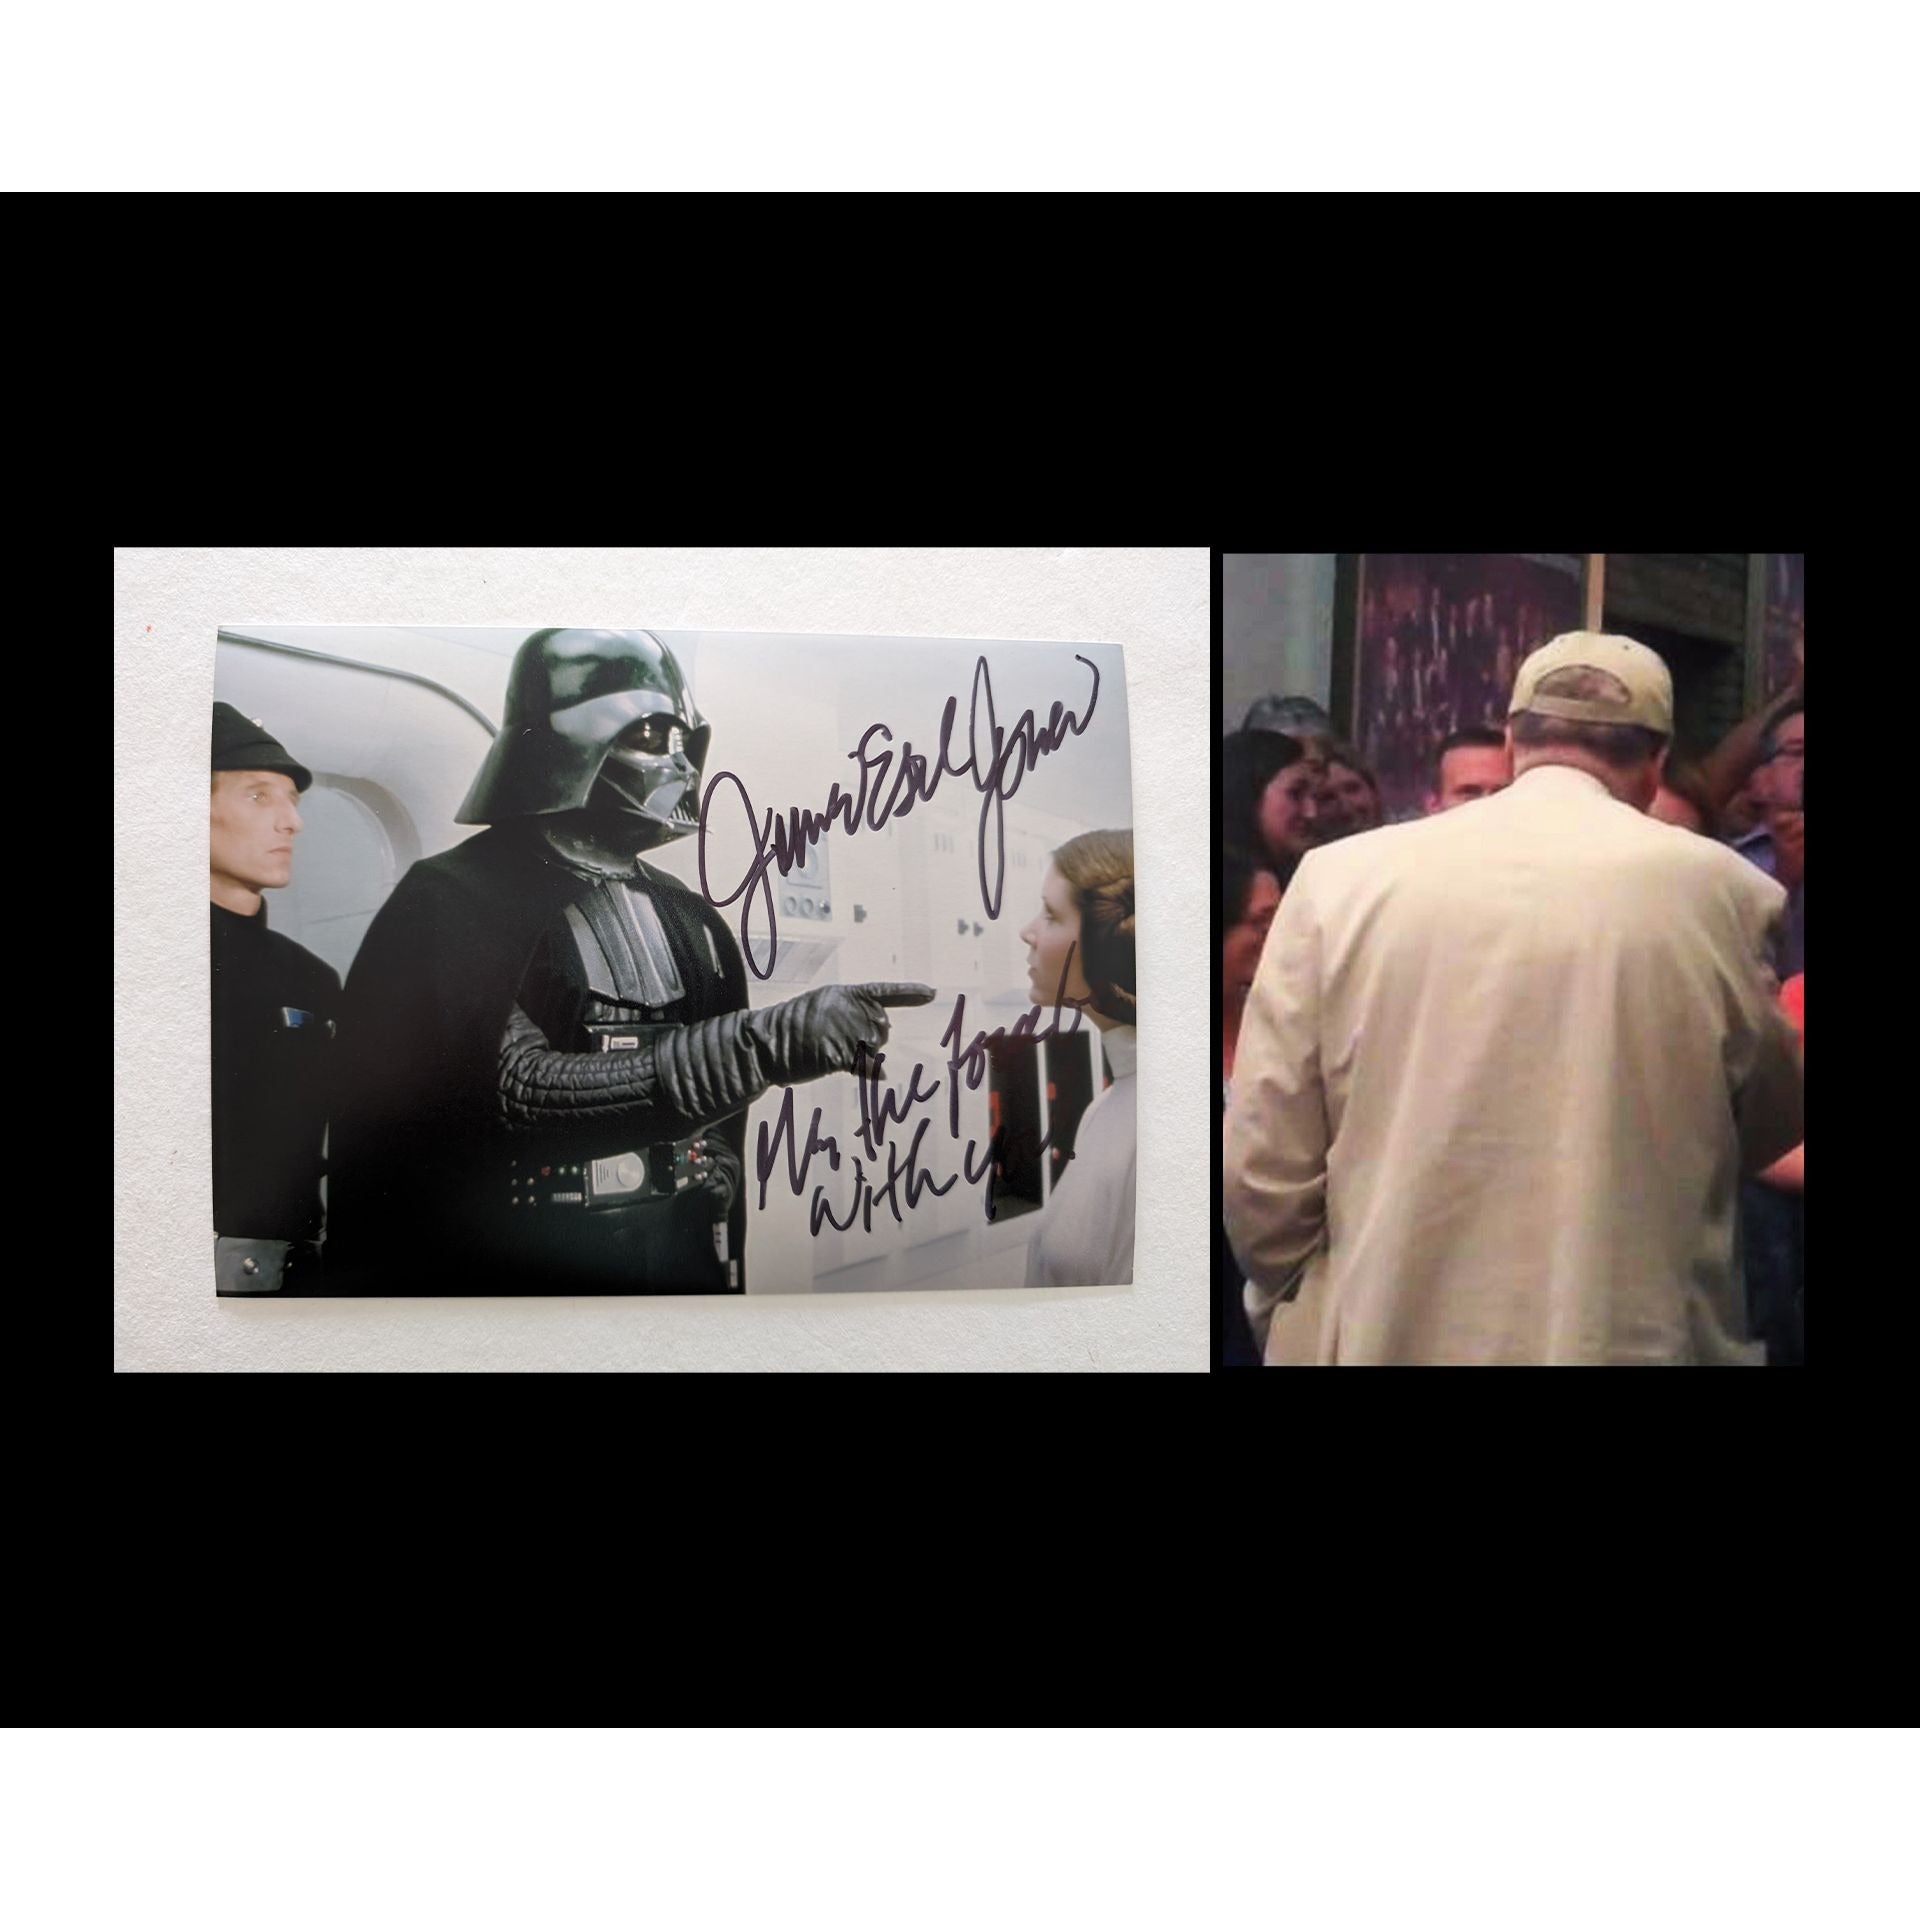 James Earl Jones Darth Vader Star Wars 5x7 photo signed with proof